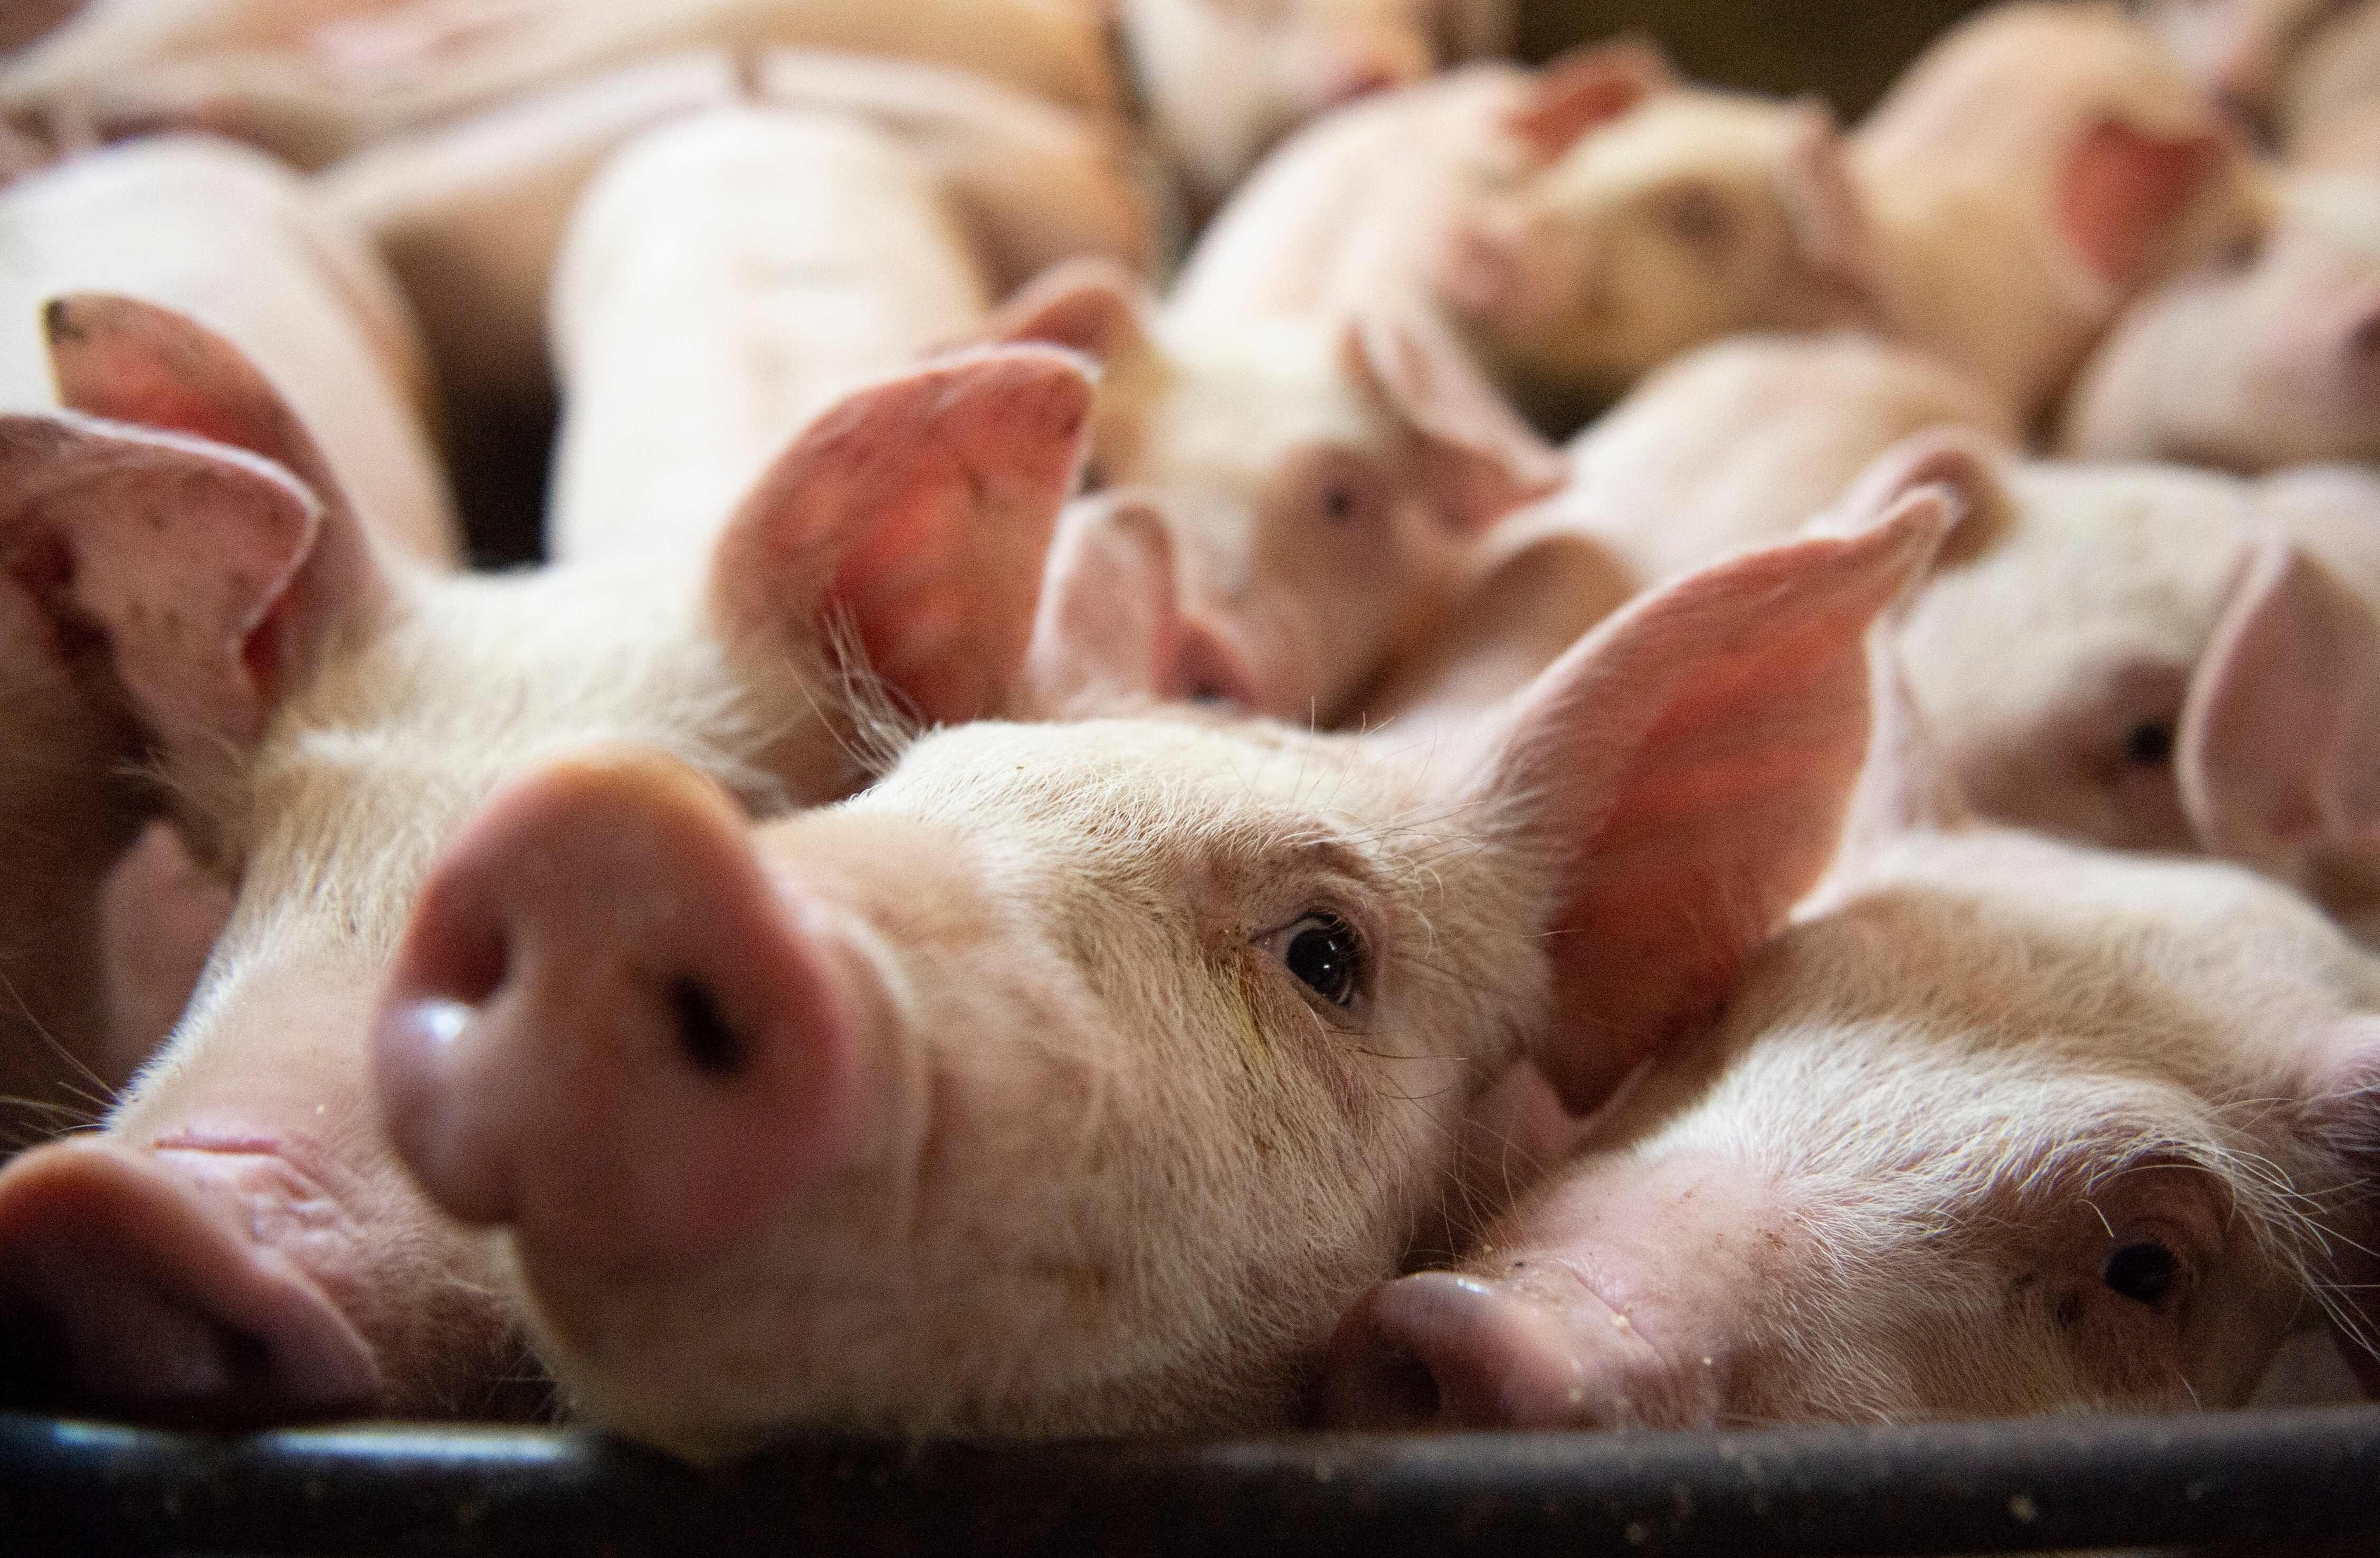 Lethal African swine fever, which sickens pigs much like Ebola kills humans, caused a dramatic outbreak in China in 2018, and within a year, roughly half the nation’s herd of more than 400 million pigs had been wiped out. Photo: AFP